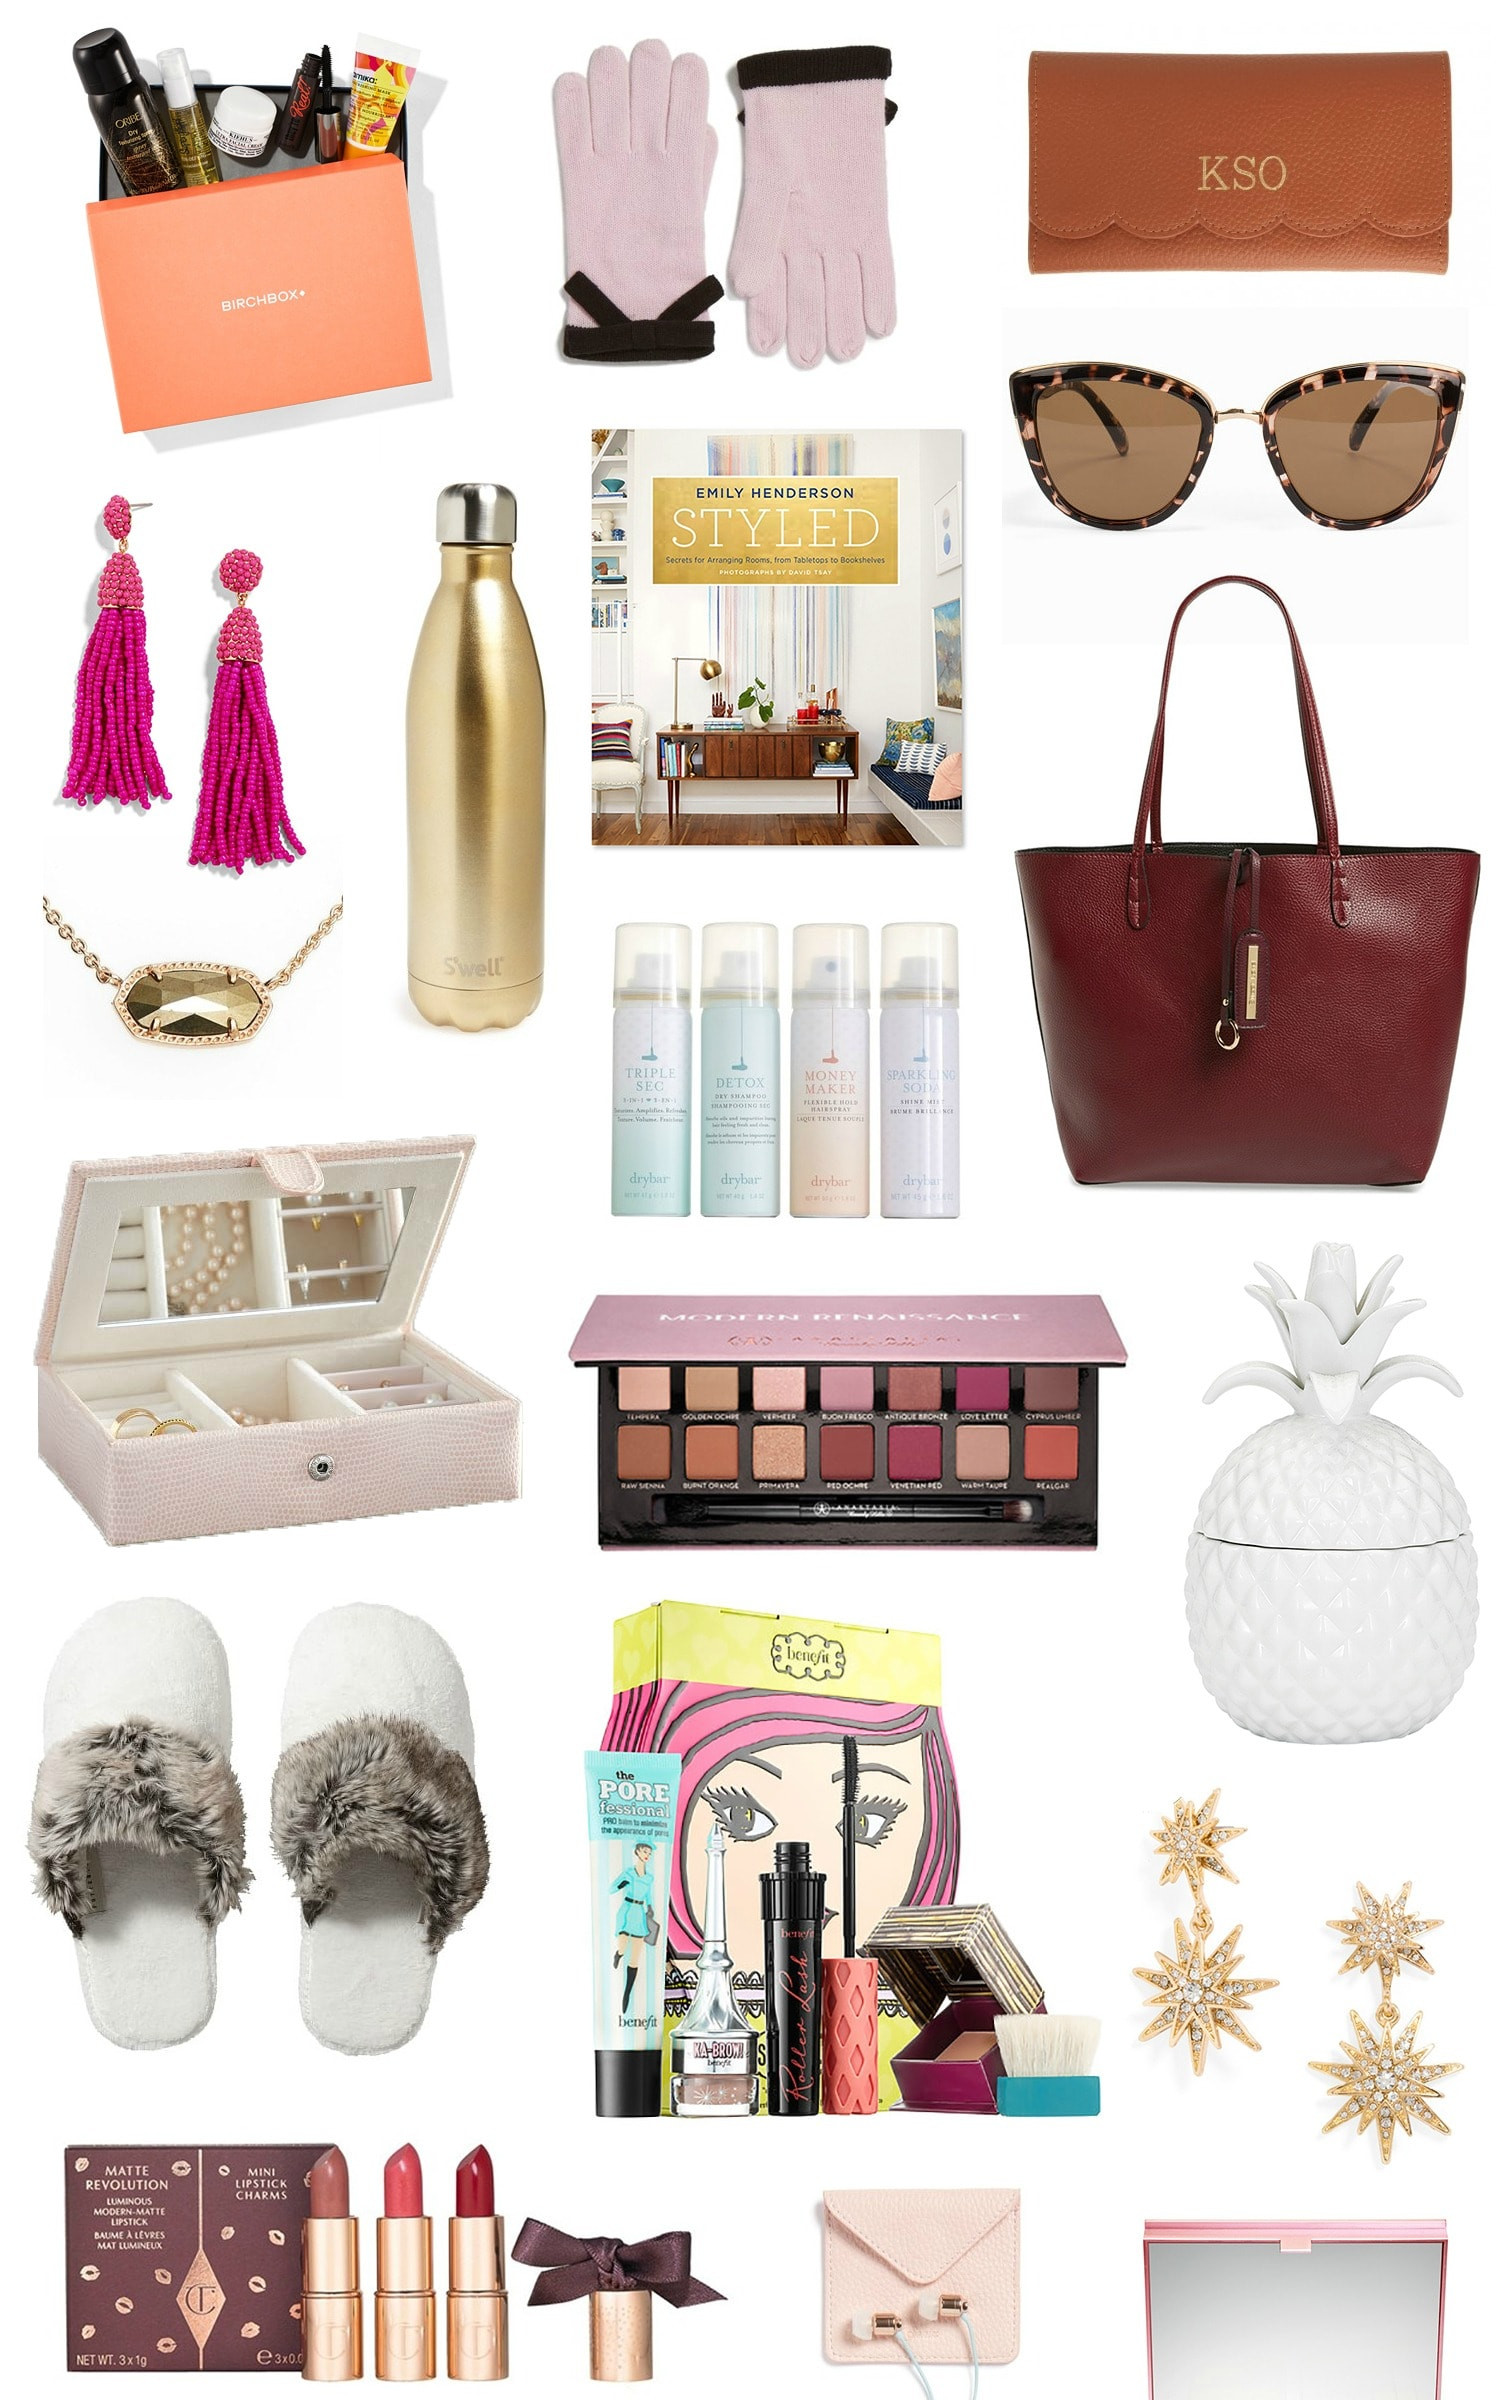 Holiday Gift Ideas For Women
 The Best Christmas Gift Ideas for Women under $50